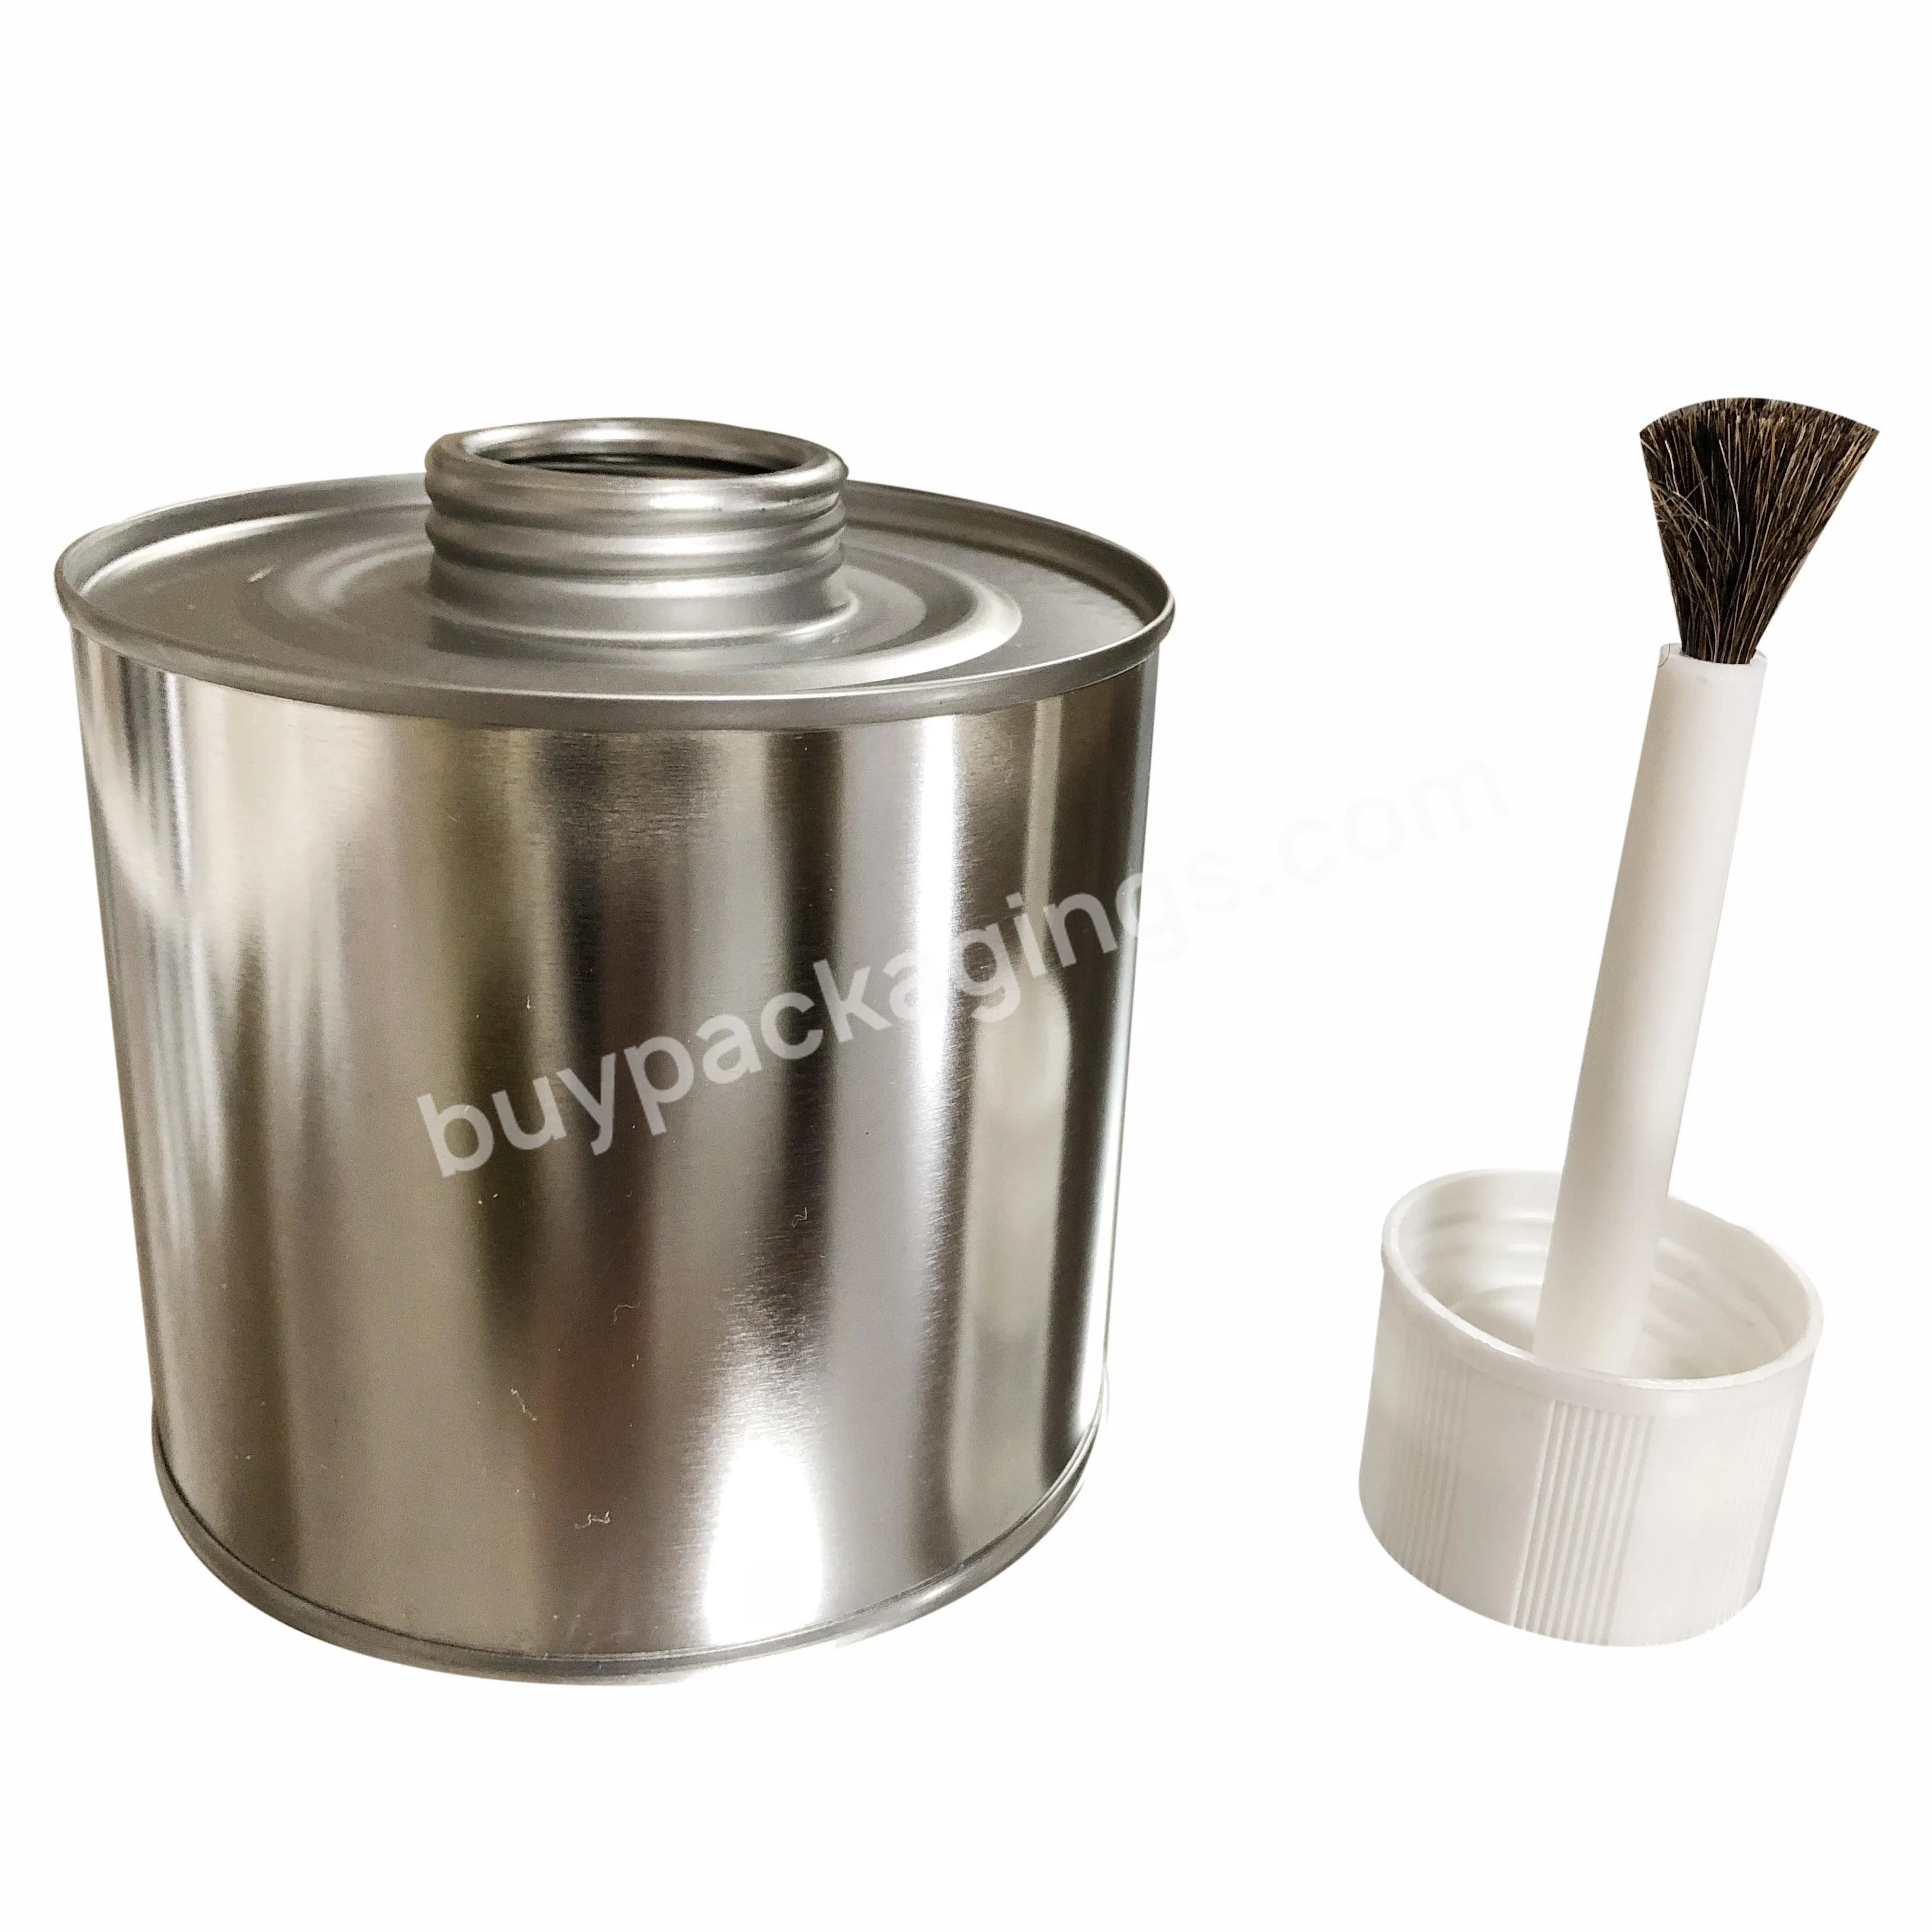 500g Empty Round Tin Can For Pvc Pipe Glue - Buy 500g Tin Can,Can For Glue,Empty Glue Can.